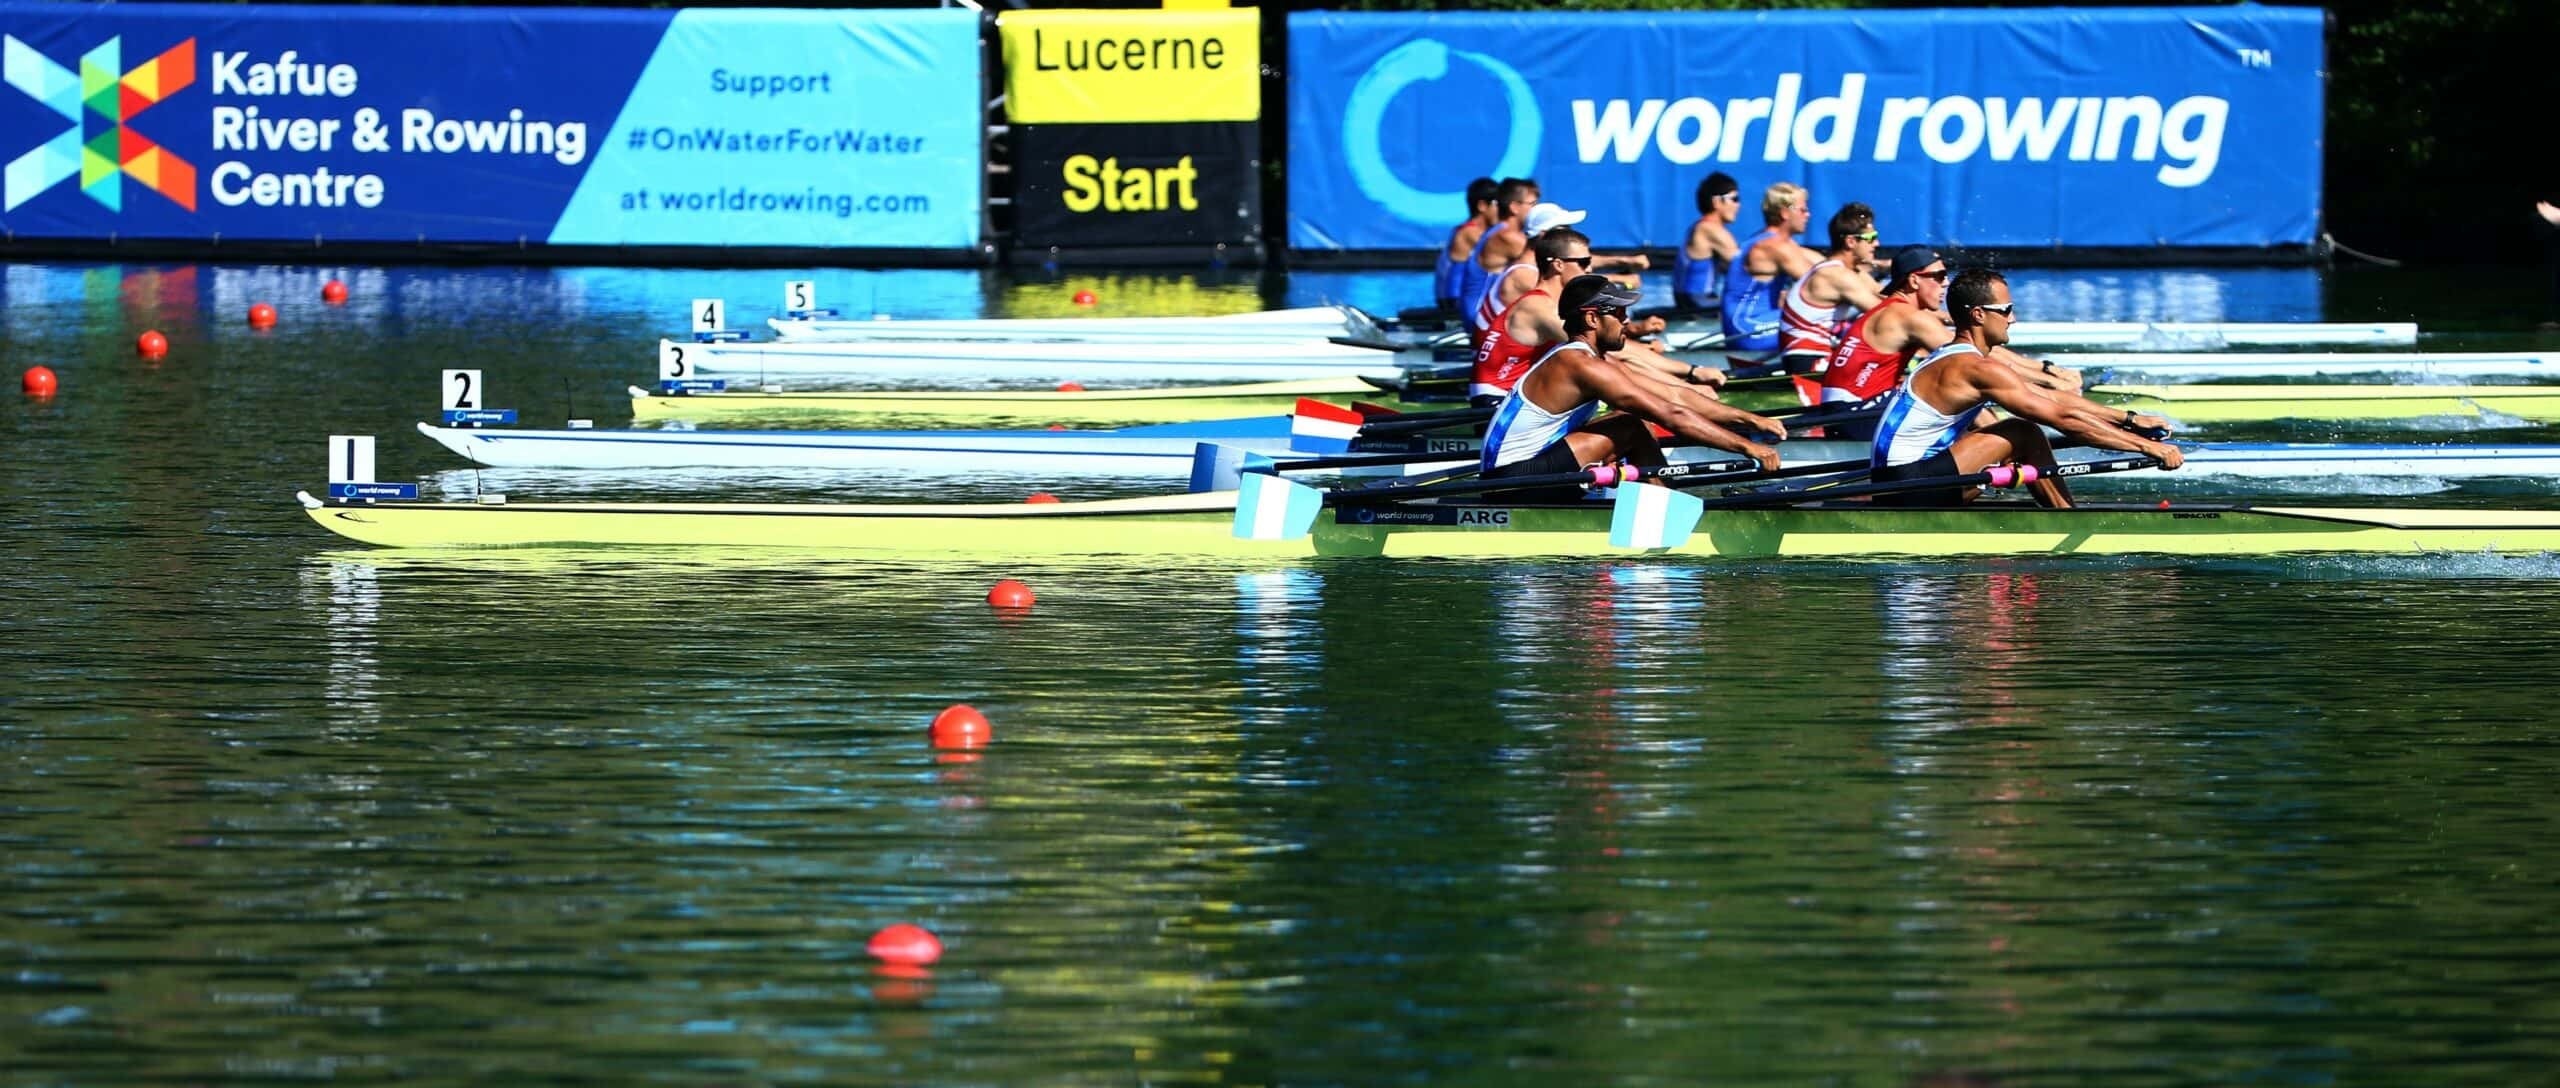 Rowing: The Men's Double Sculls event at the 2021 World Rowing Cup II, Water tournament in Lucerne. 2560x1090 Dual Screen Wallpaper.